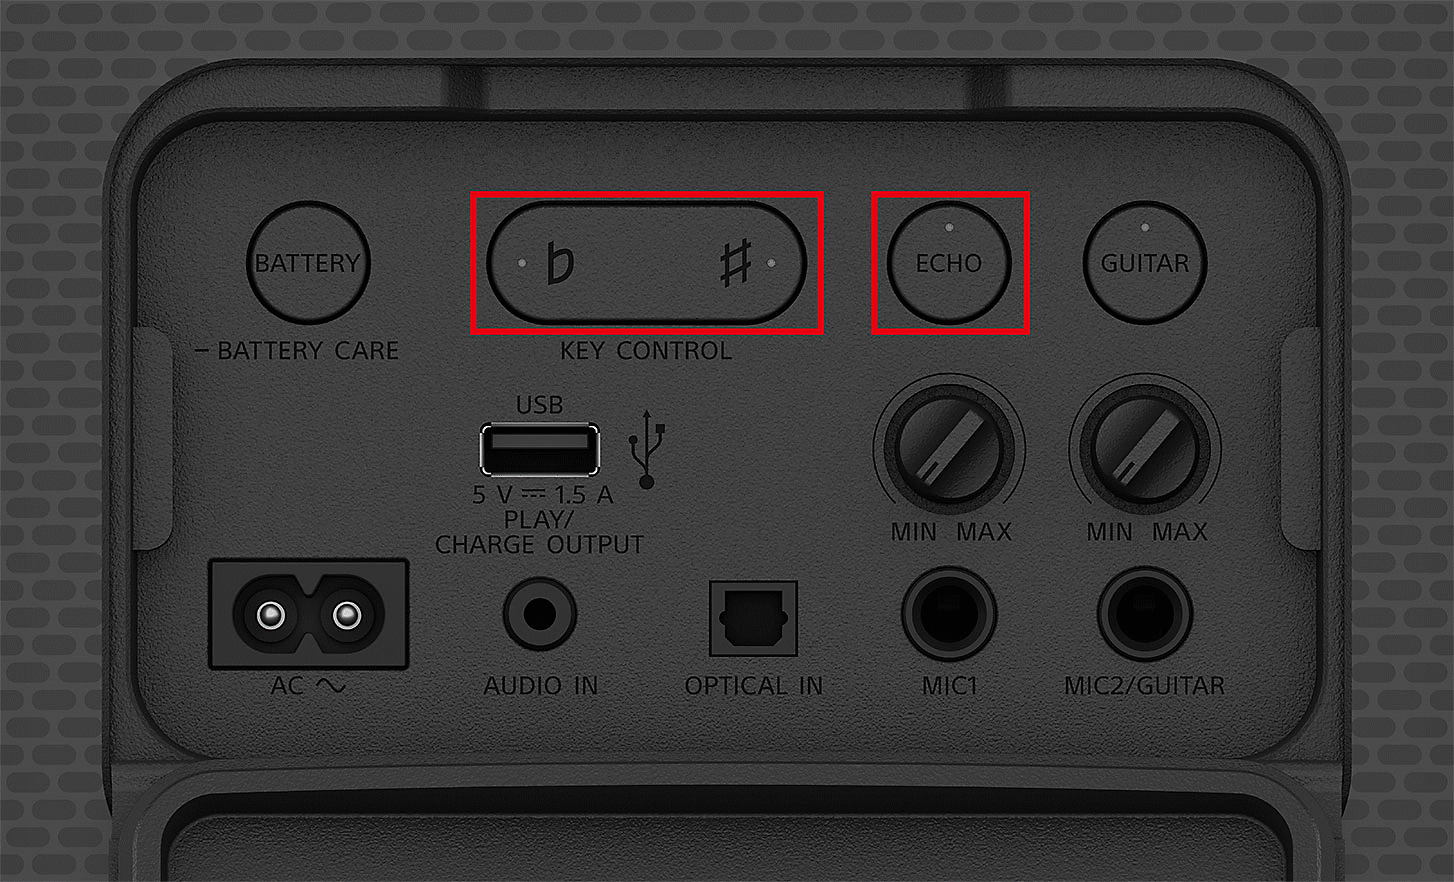 Close-up image of the SRS-XV800 control panel. The Echo and Key Control buttons are highlighted by red boxes